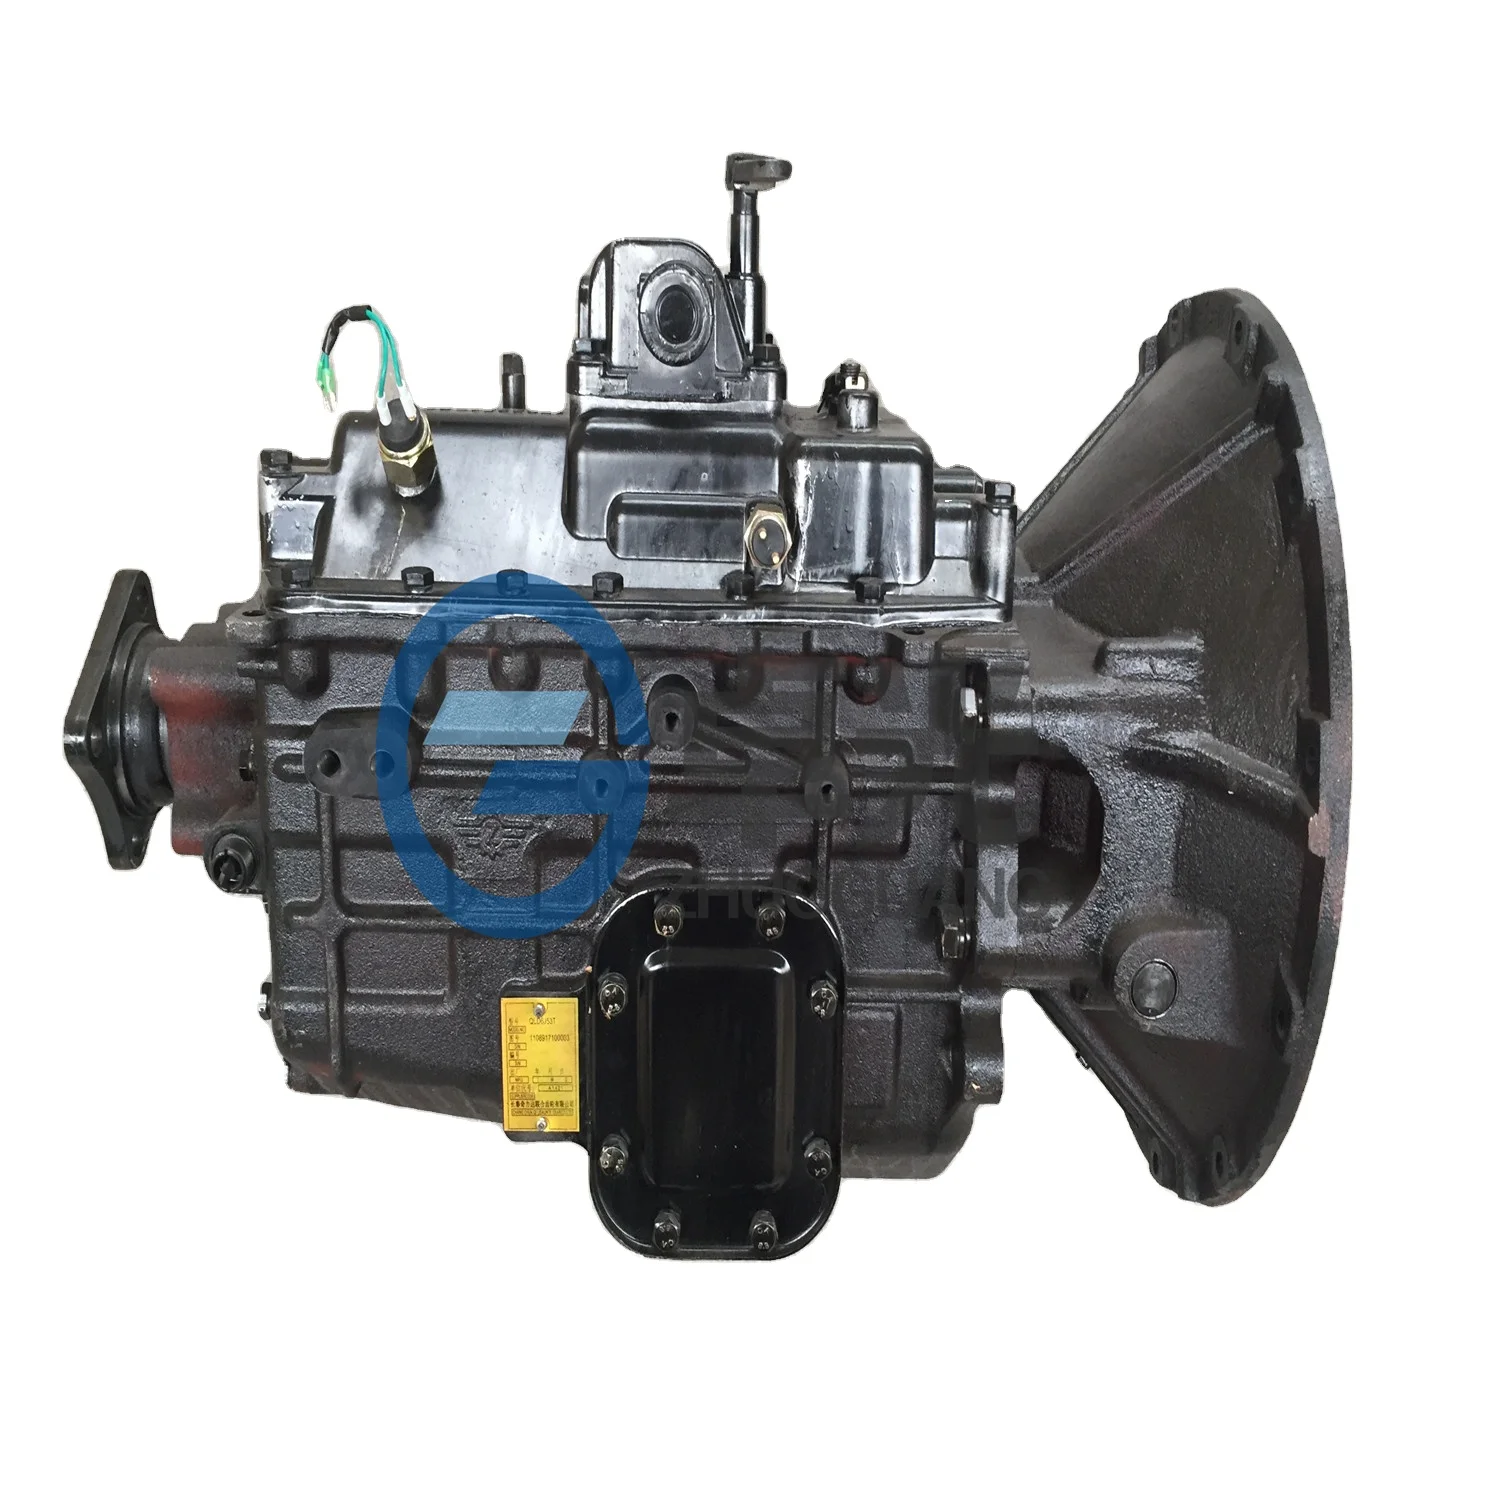 
1108917100003 Foton Gearbox specially Foton 1099 exclusive agent for Russian market Hot sale high quality auman aumark  (1600069987090)